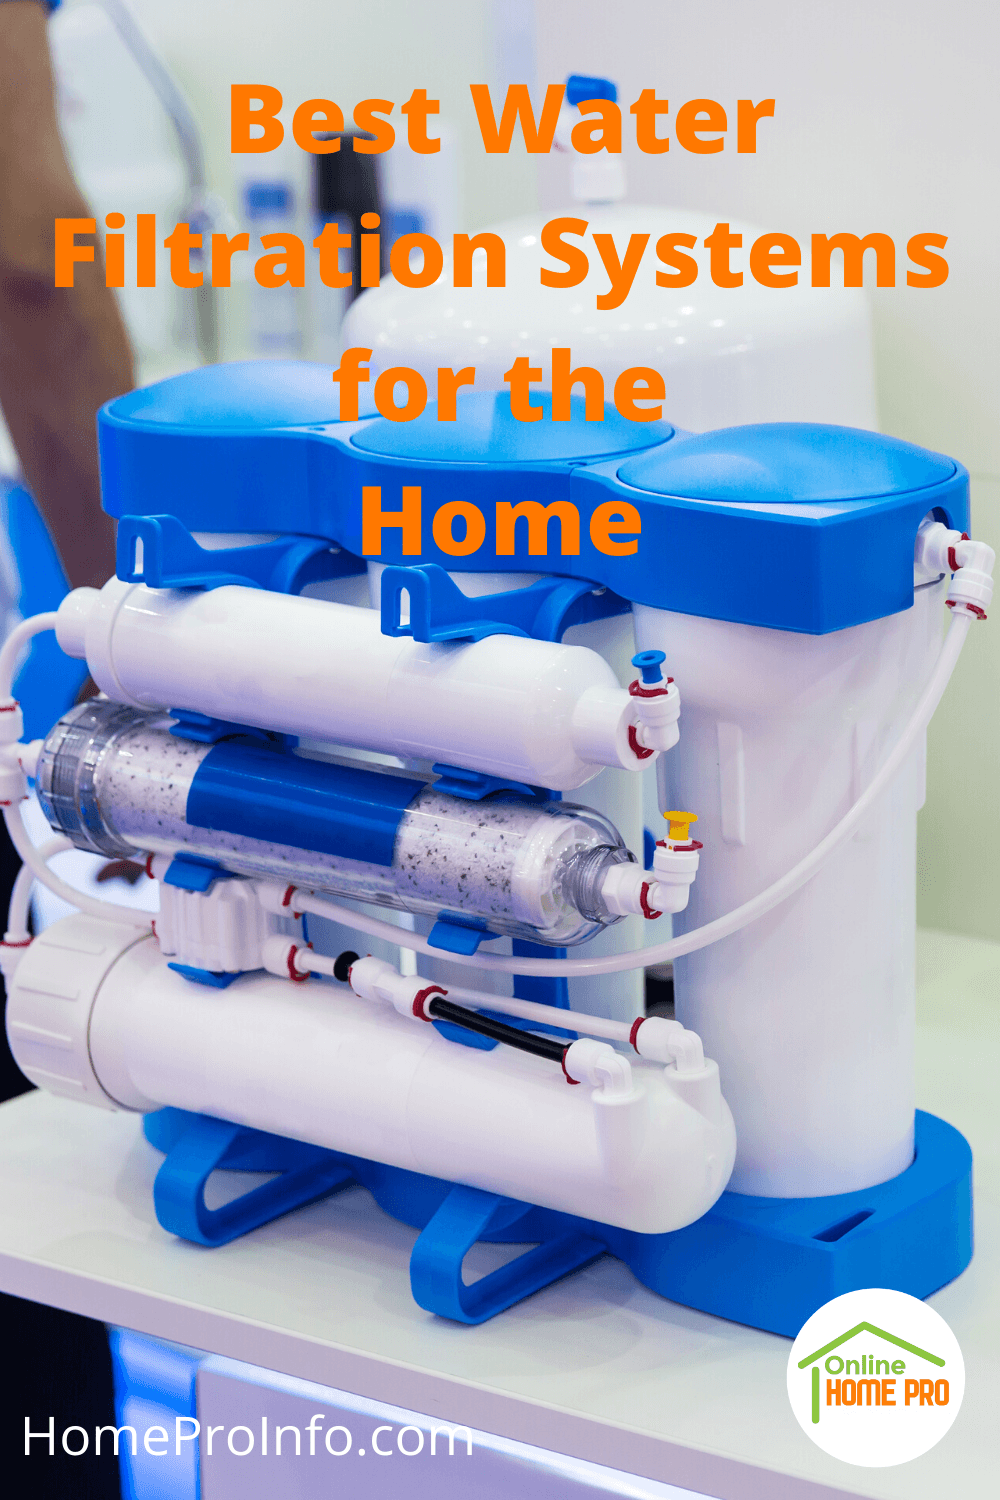 Water Filtration Systems for the Home